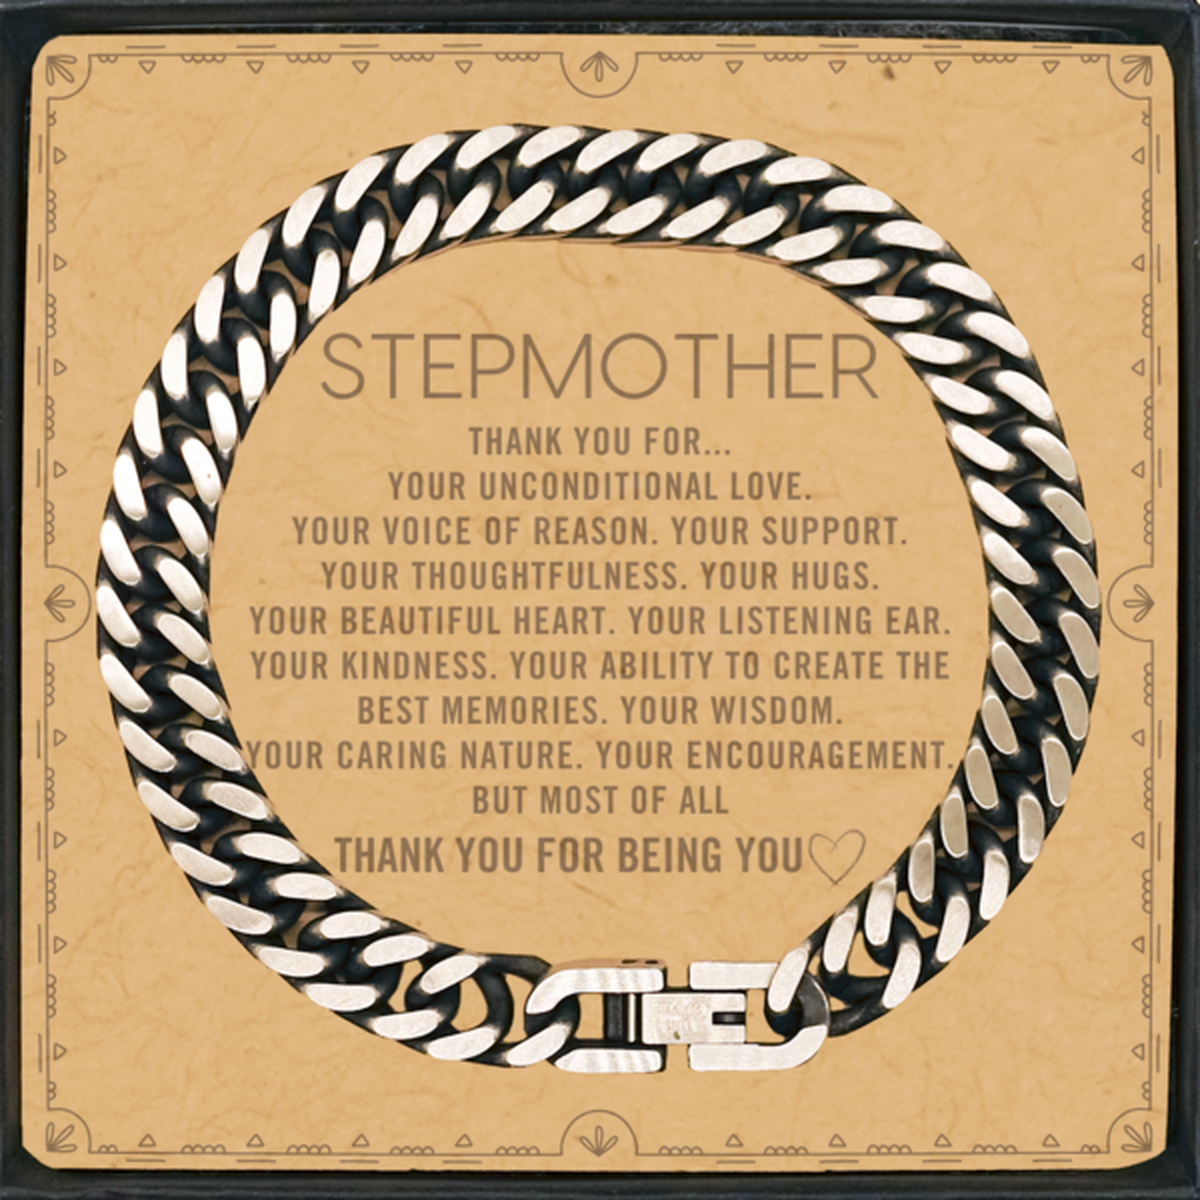 Stepmother Cuban Link Chain Bracelet Custom, Message Card Gifts For Stepmother Christmas Graduation Birthday Gifts for Men Women Stepmother Thank you for Your unconditional love